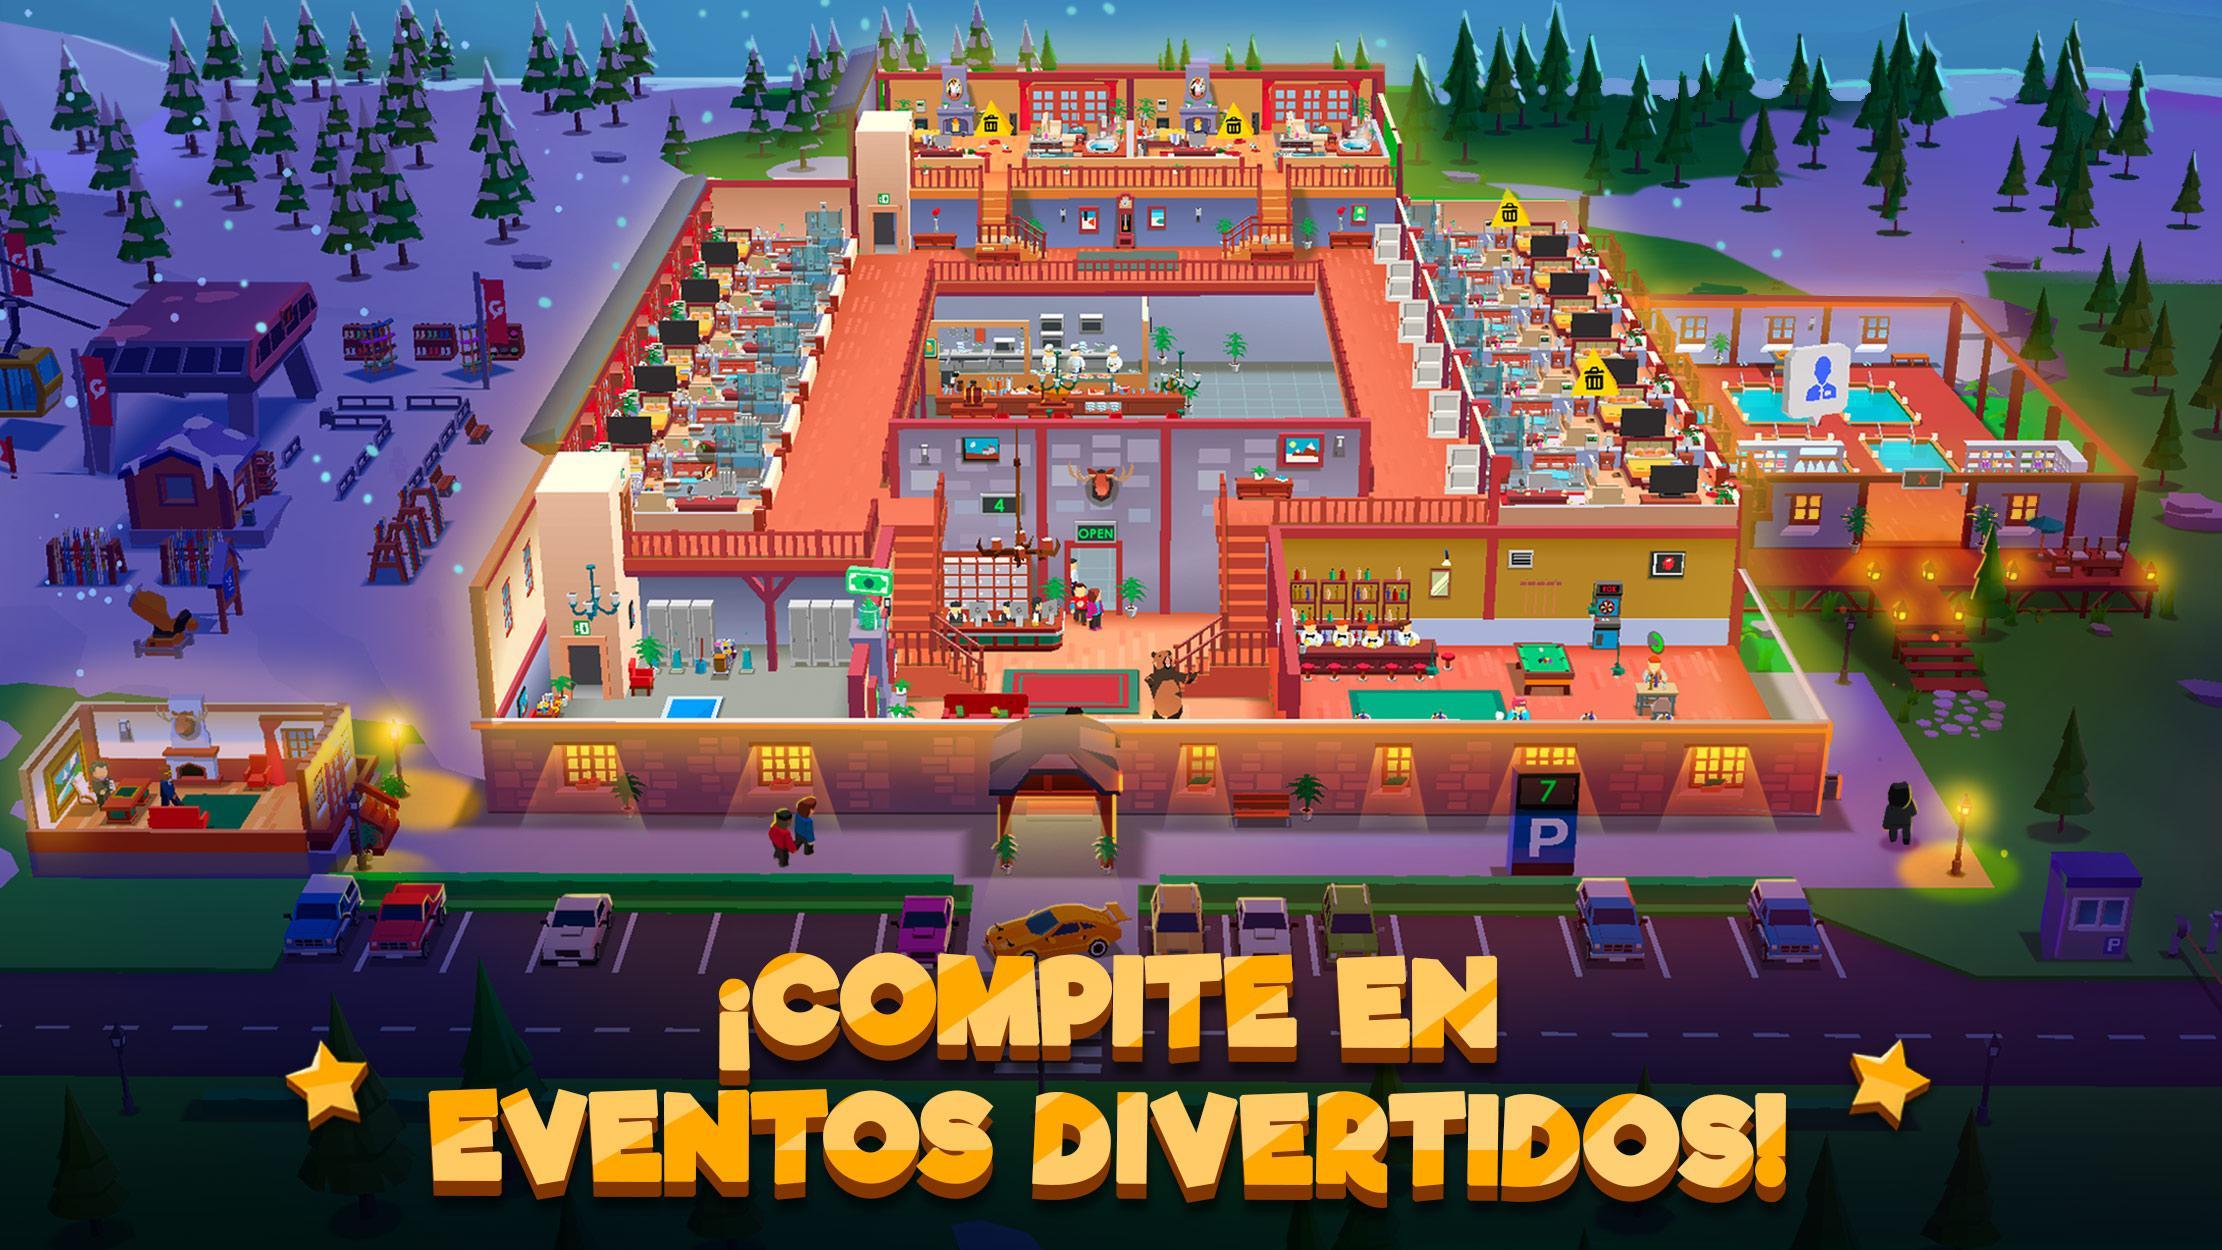 Screenshot 1 of Hotel Empire Tycoon－Idle Game 3.21